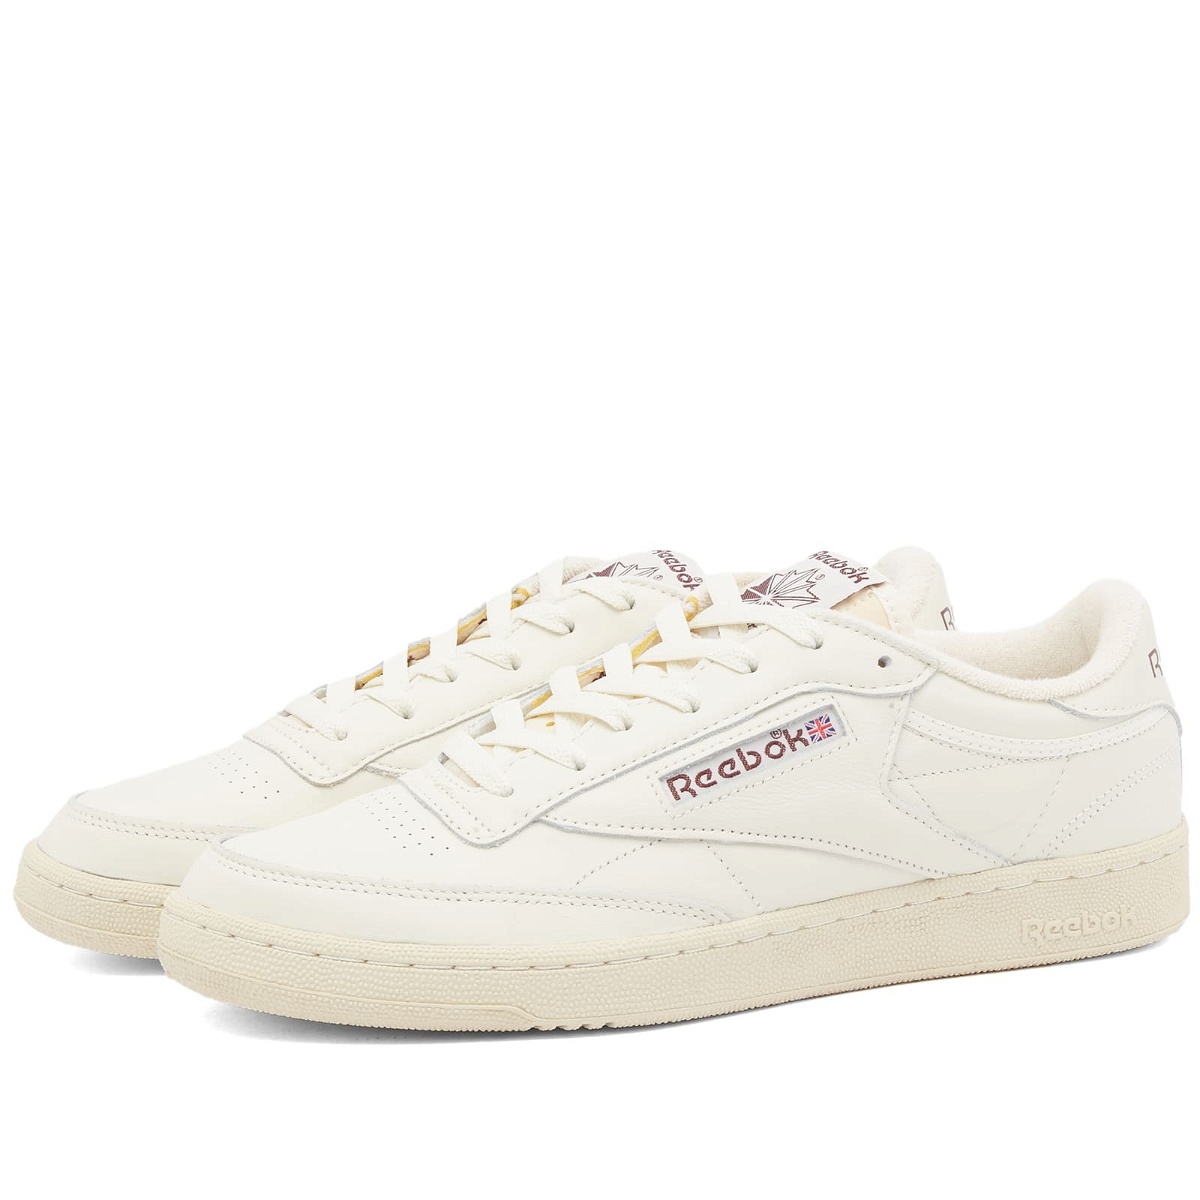 Reebok - Maison Margiela Project 0 Memory Of Leather-Trimmed 